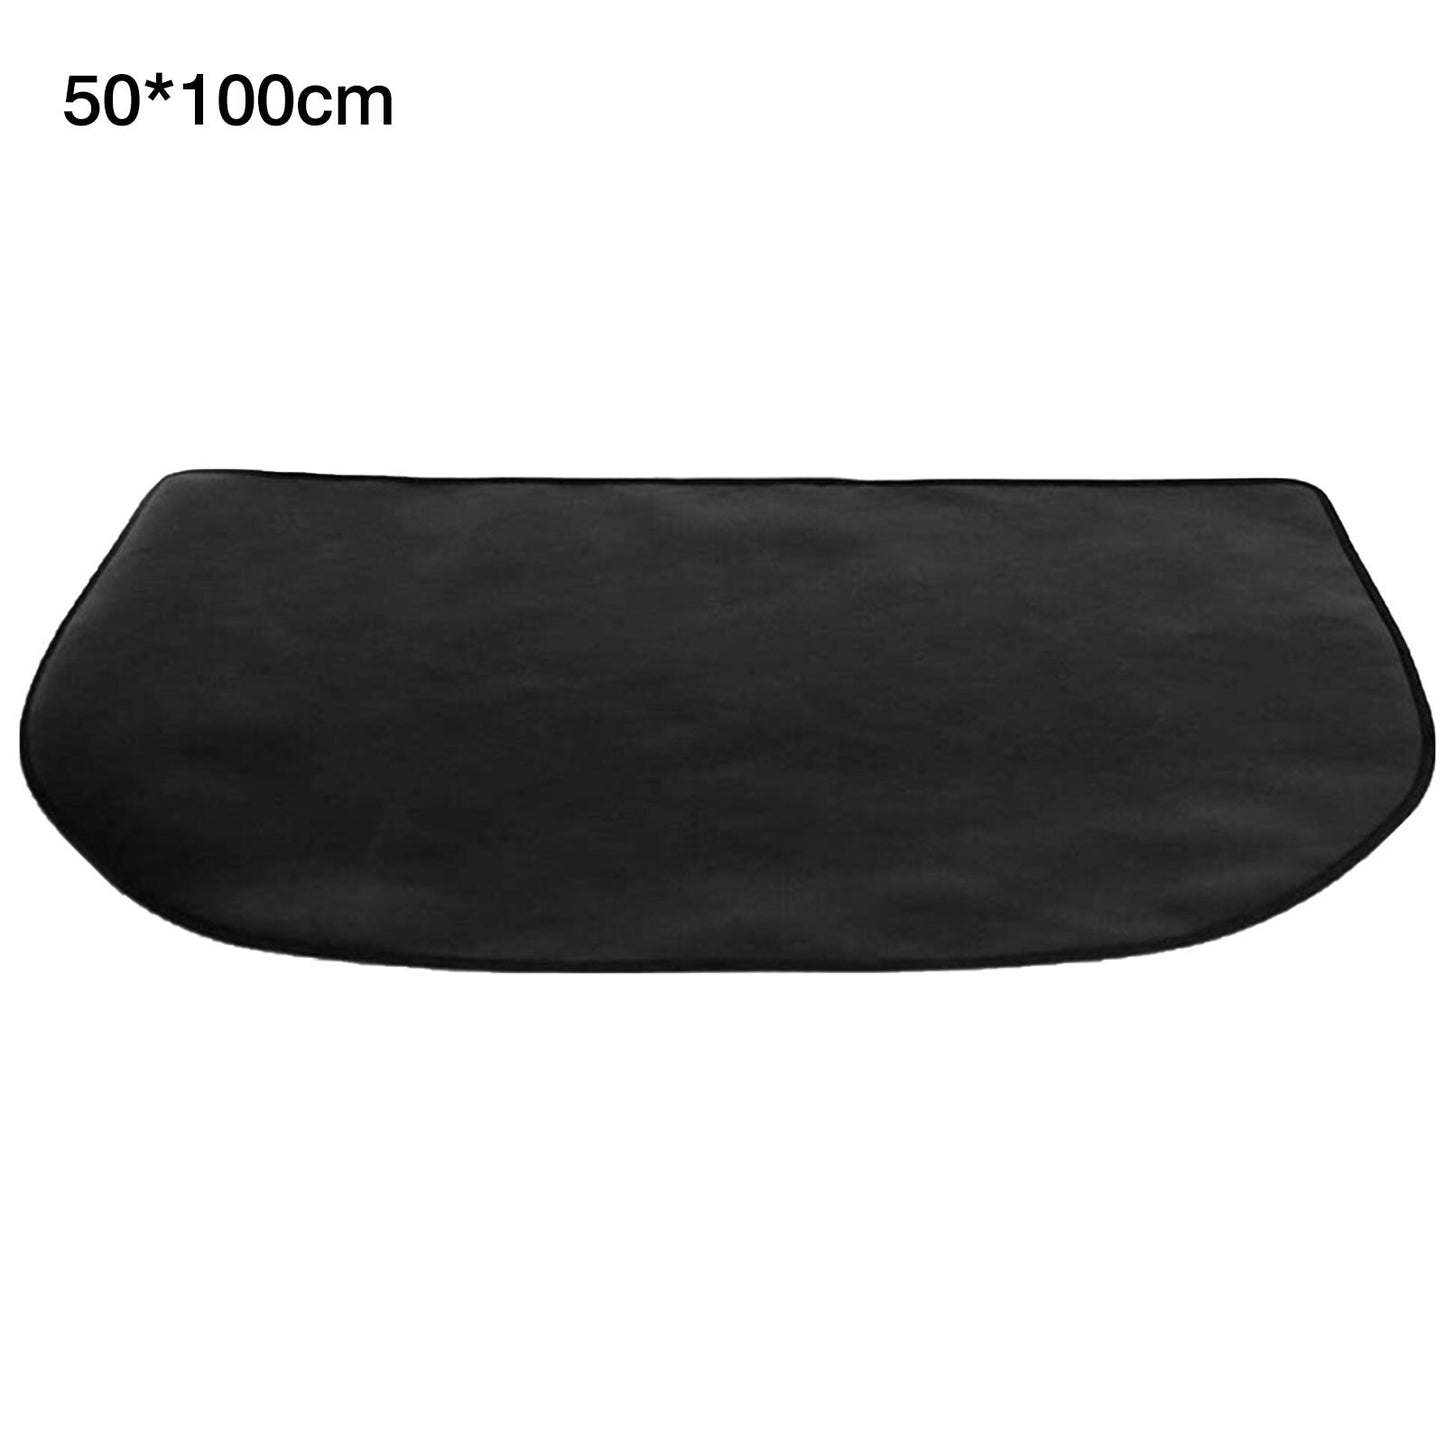 Fire Retardant Heat Insulation Black/Gray Fireplace Carpet Non-slip Mat Survival Emergency Blankets For Fireplace Camping Supply